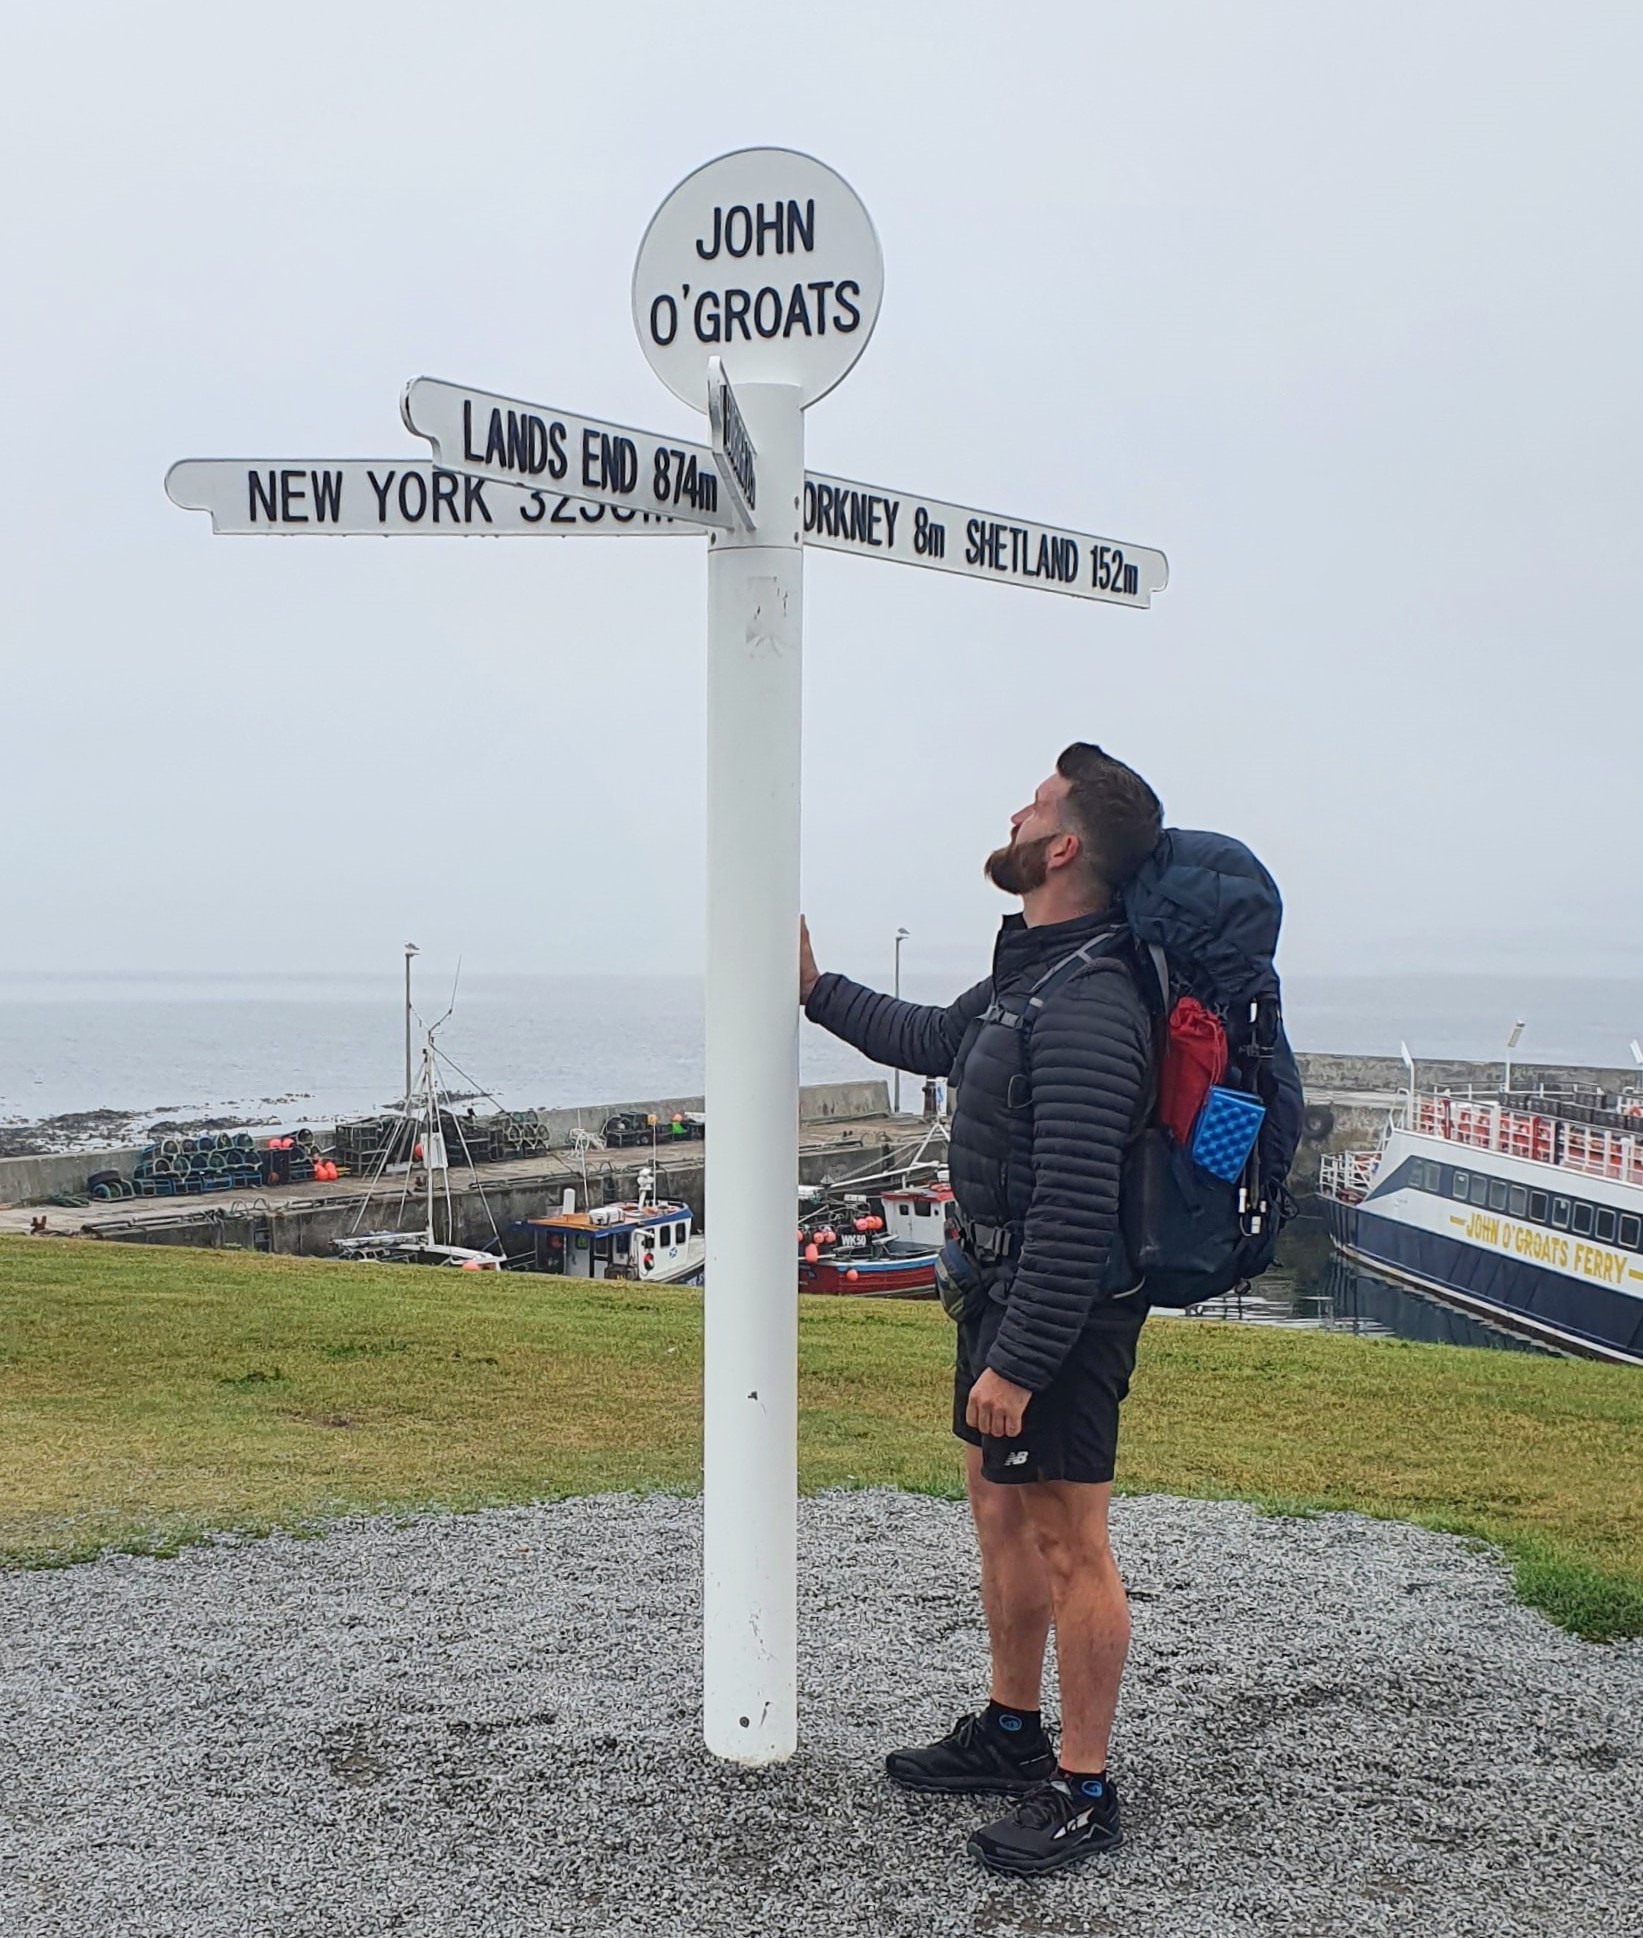 Derbyshire Man Hiking 1,200 Miles From John O’Groats To Land’s End For Charities